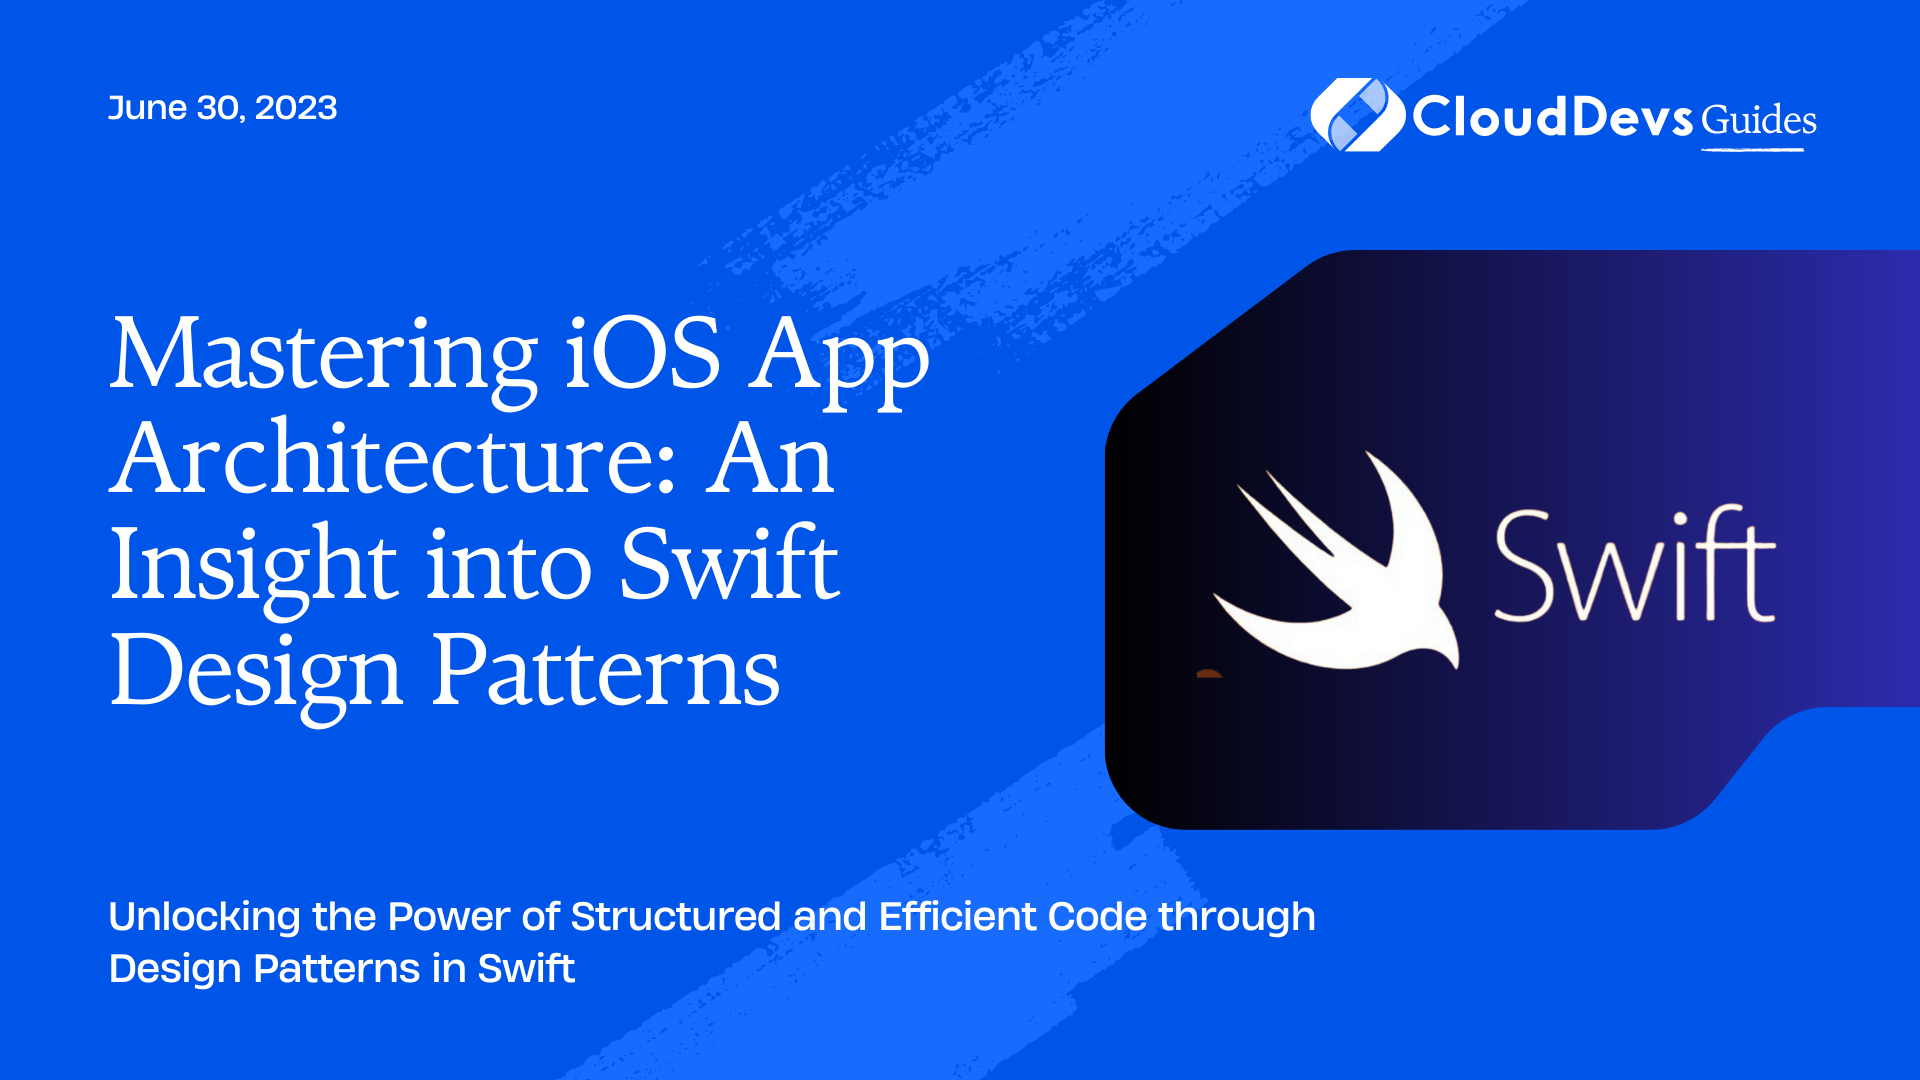 Mastering iOS App Architecture: An Insight into Swift Design Patterns